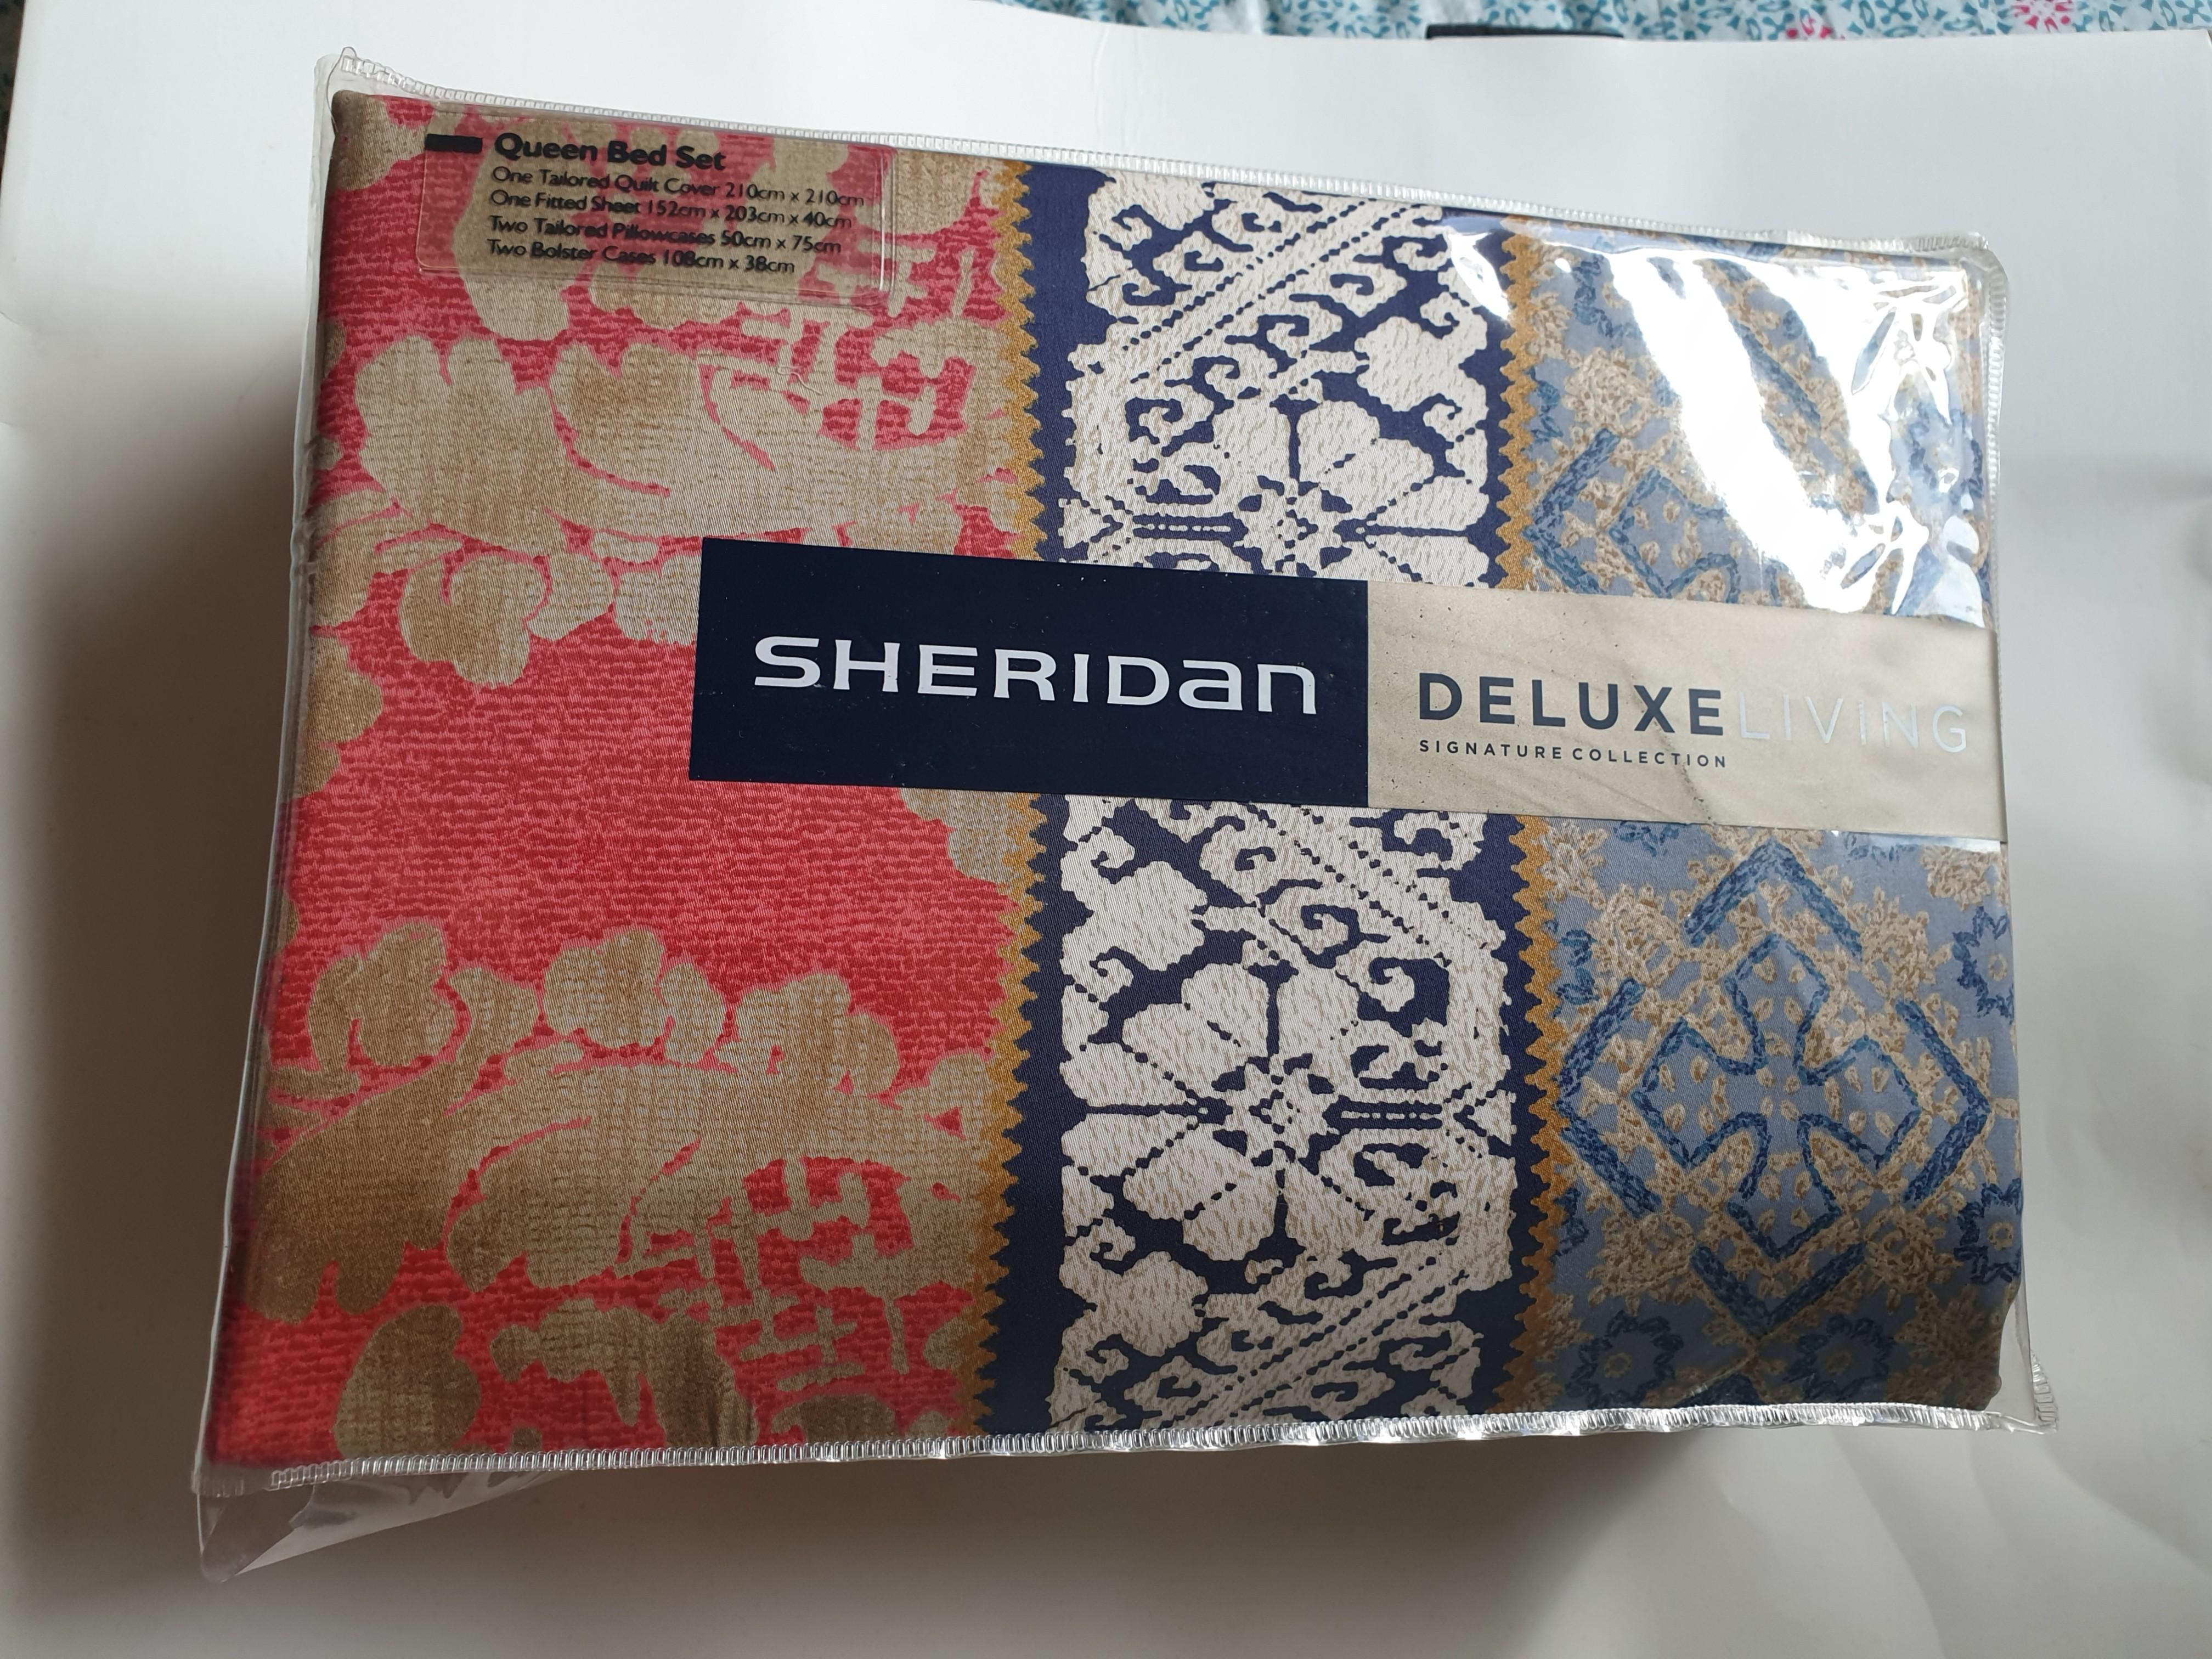 New Sheridan Deluxe Living signature collection Tailored pillow cases